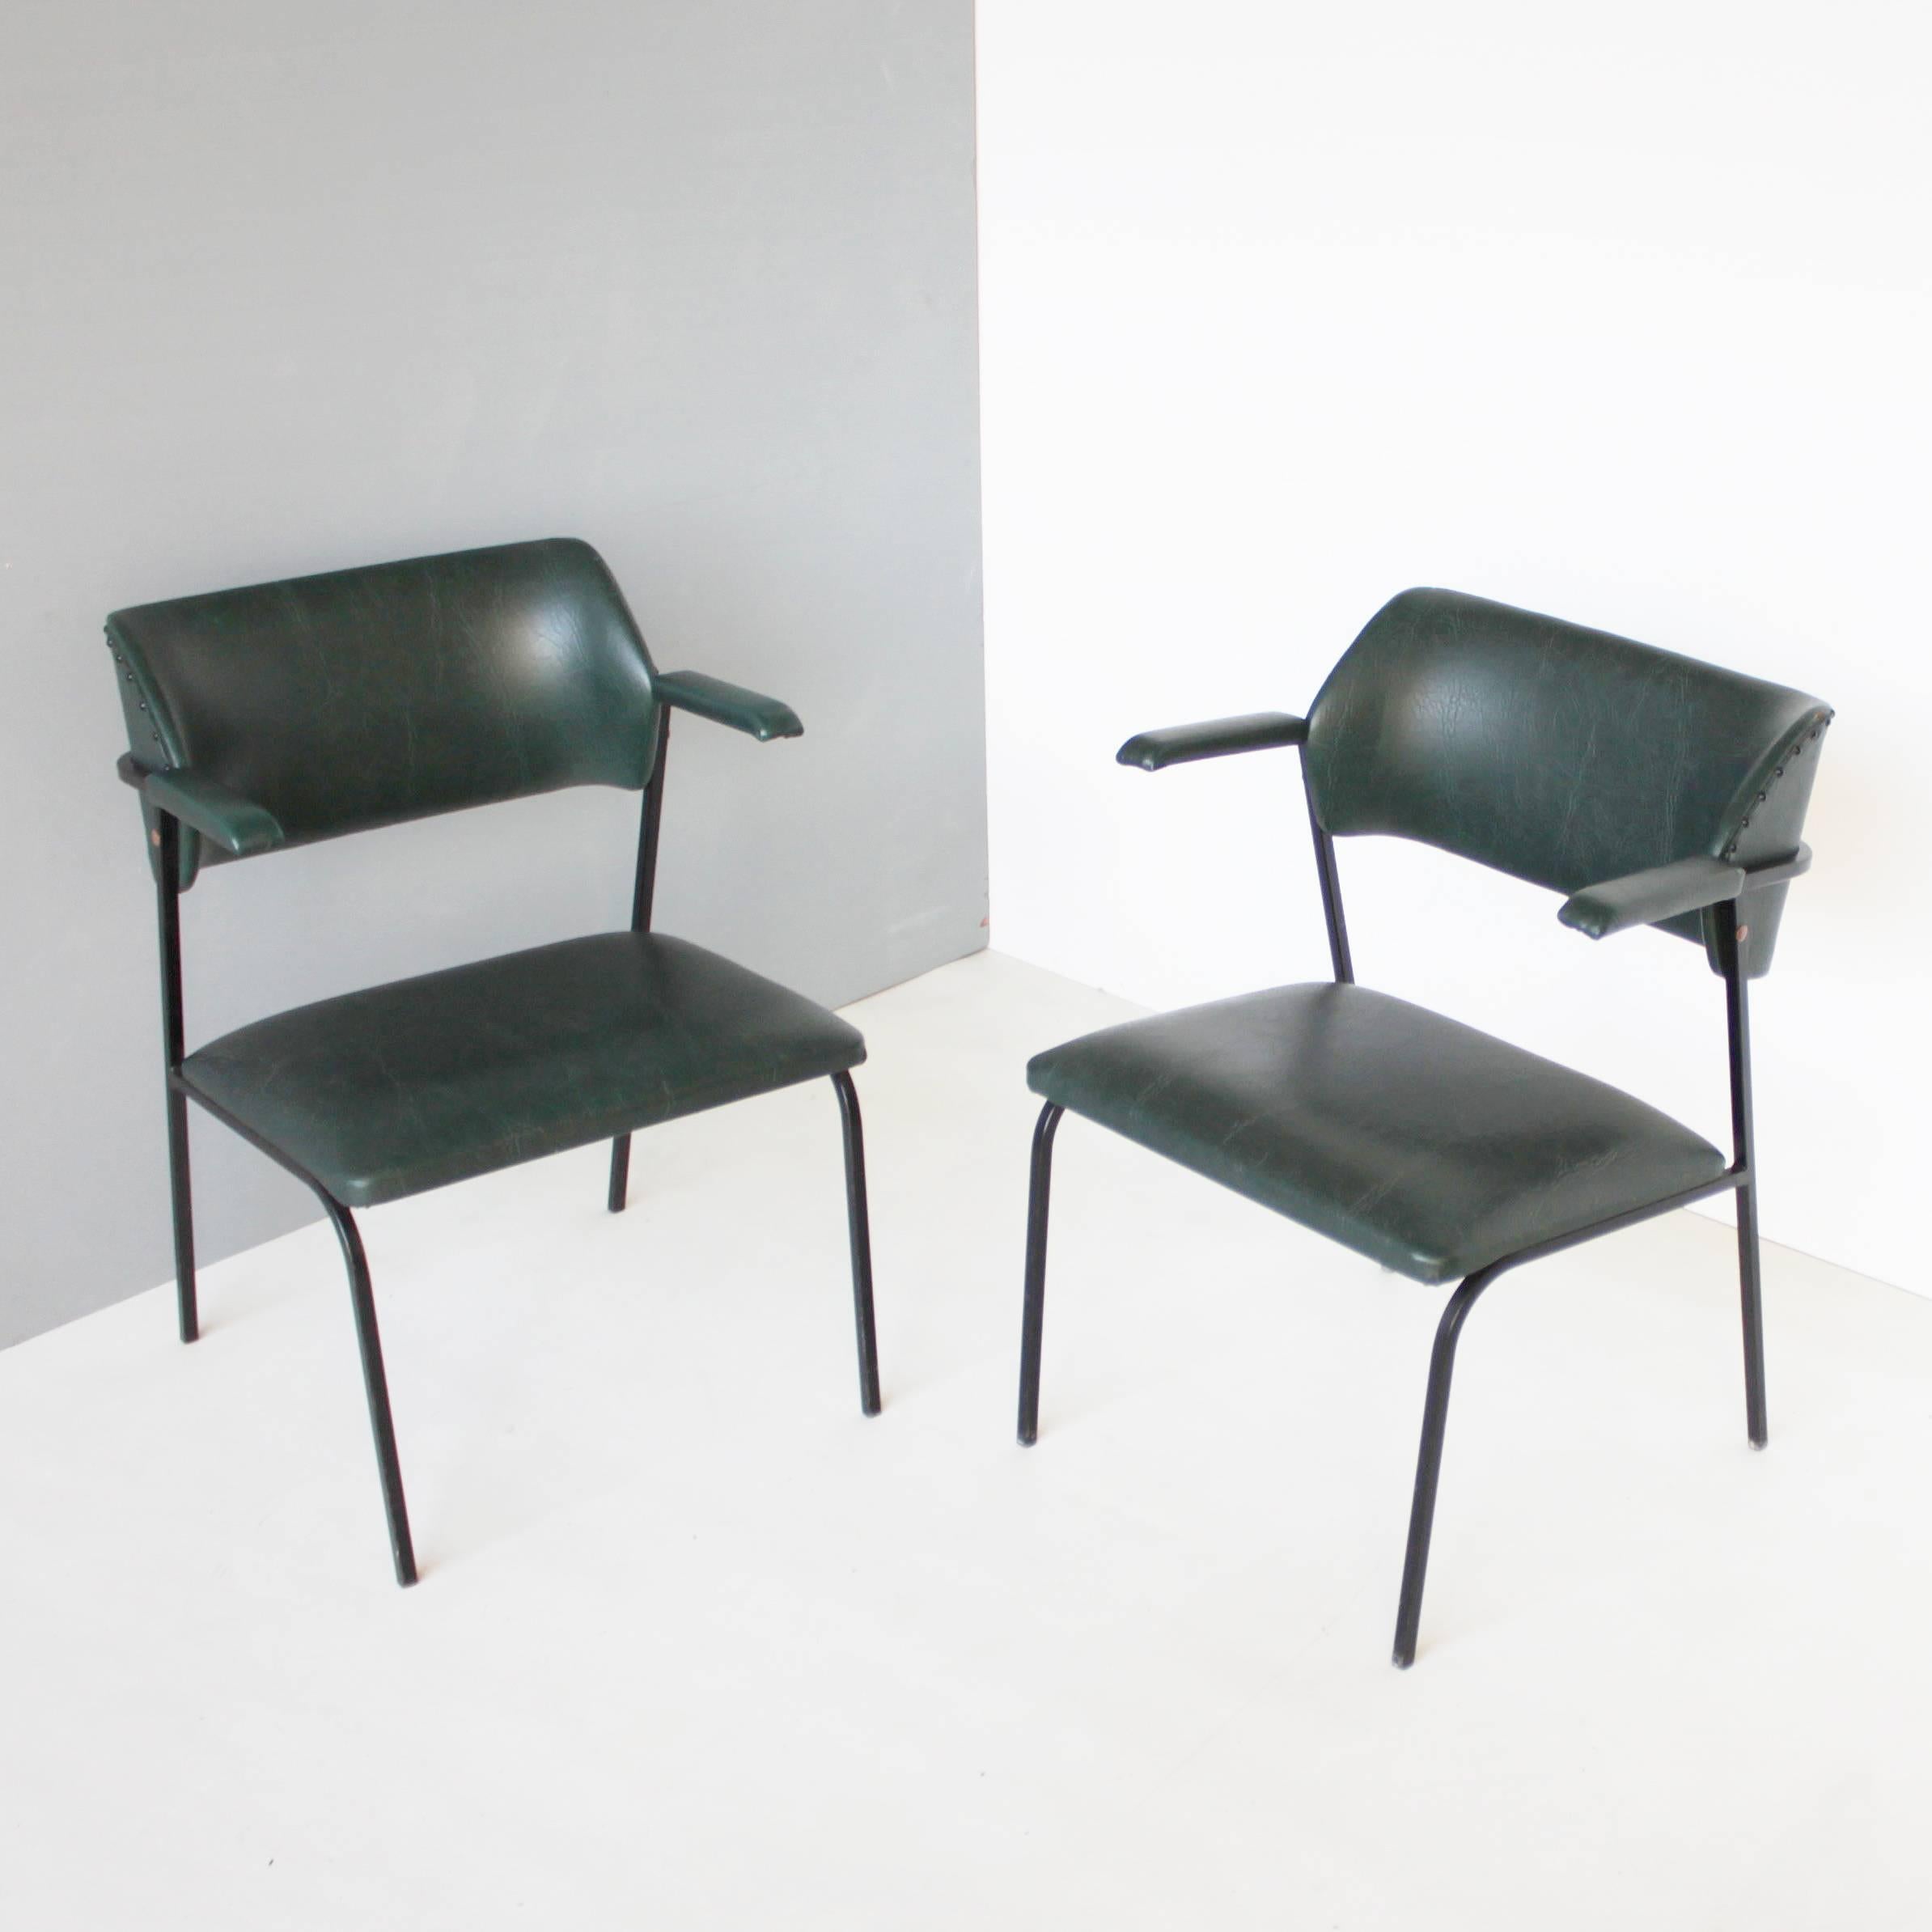 European Four Faux Leather Chairs in the Style of Jacques Adnet